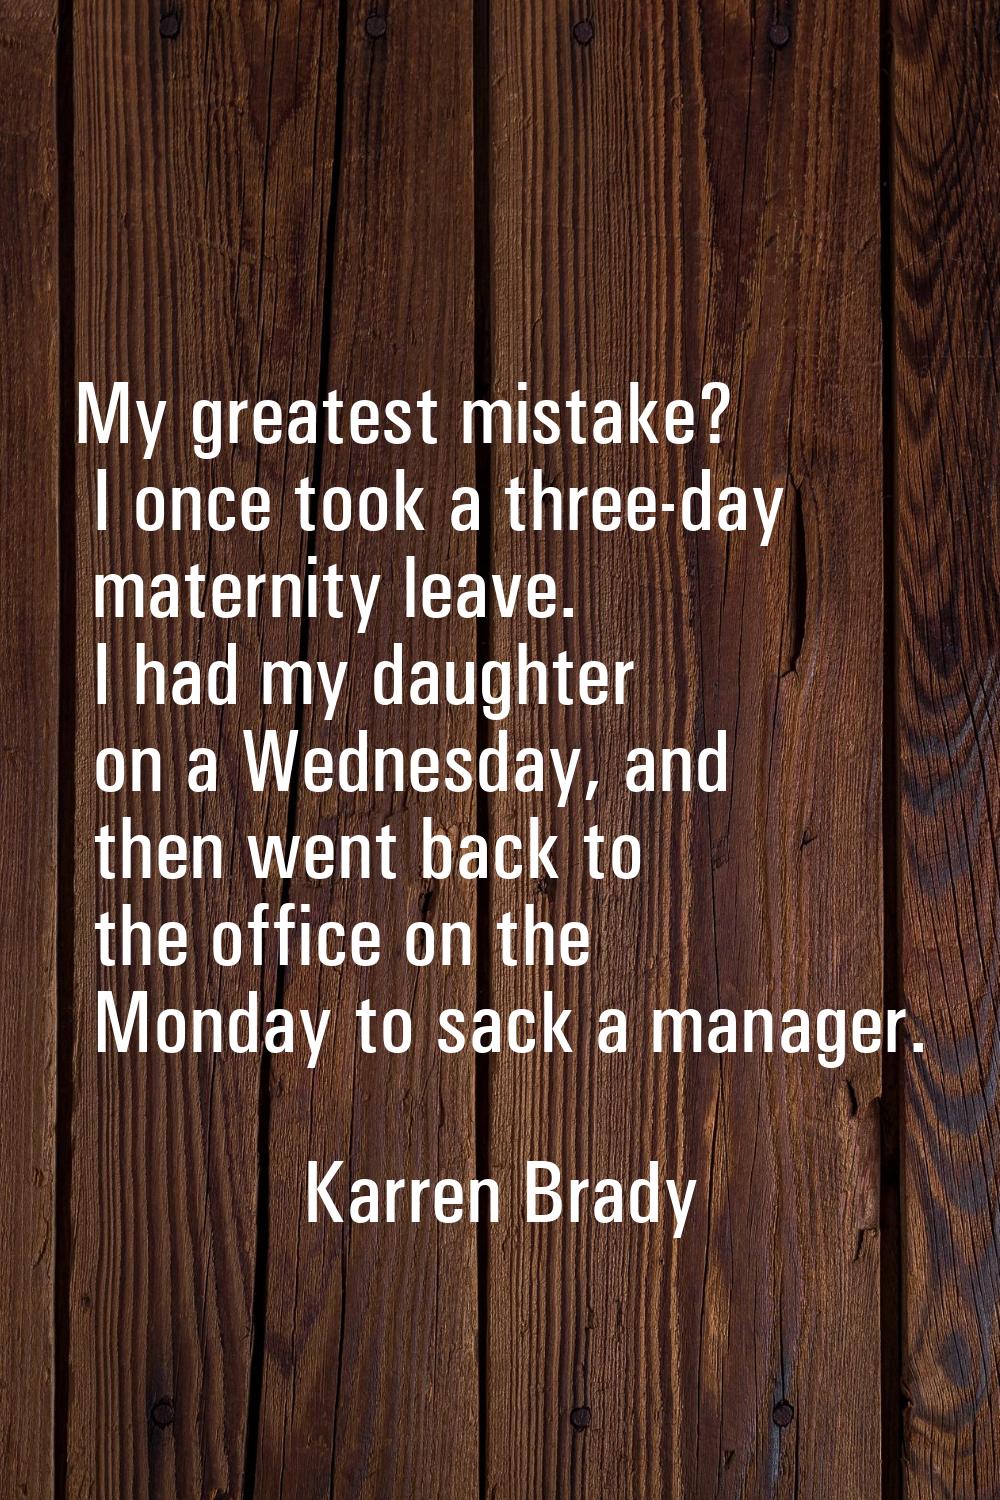 My greatest mistake? I once took a three-day maternity leave. I had my daughter on a Wednesday, and